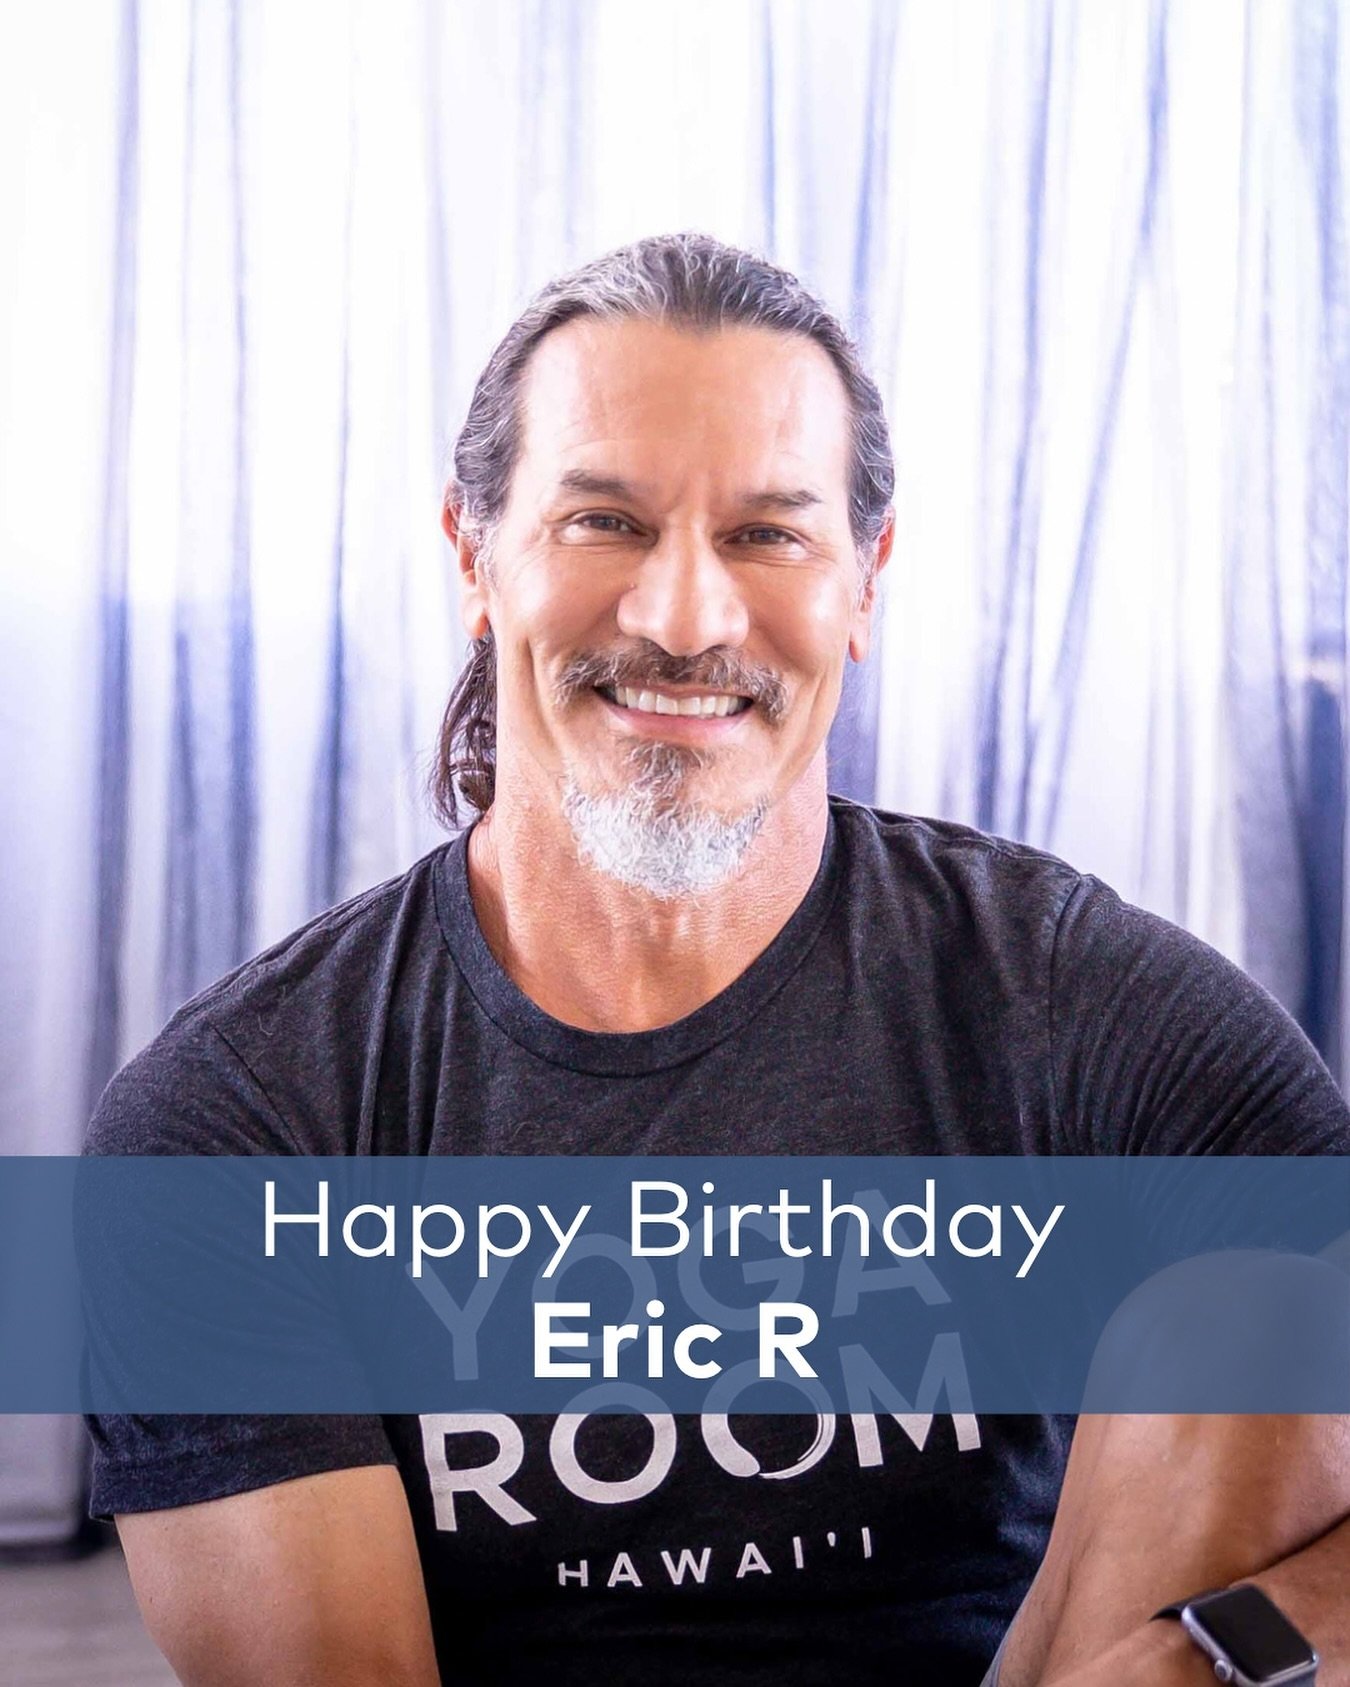 Happy birthday @ericrosso !!!

Eric is generous, warm, inquisitive and easy to chat with. He is a man of many talents and interests, but the common thread seems to be self improvement through compassion. 

Three fun facts about Eric R:
1. In his earl